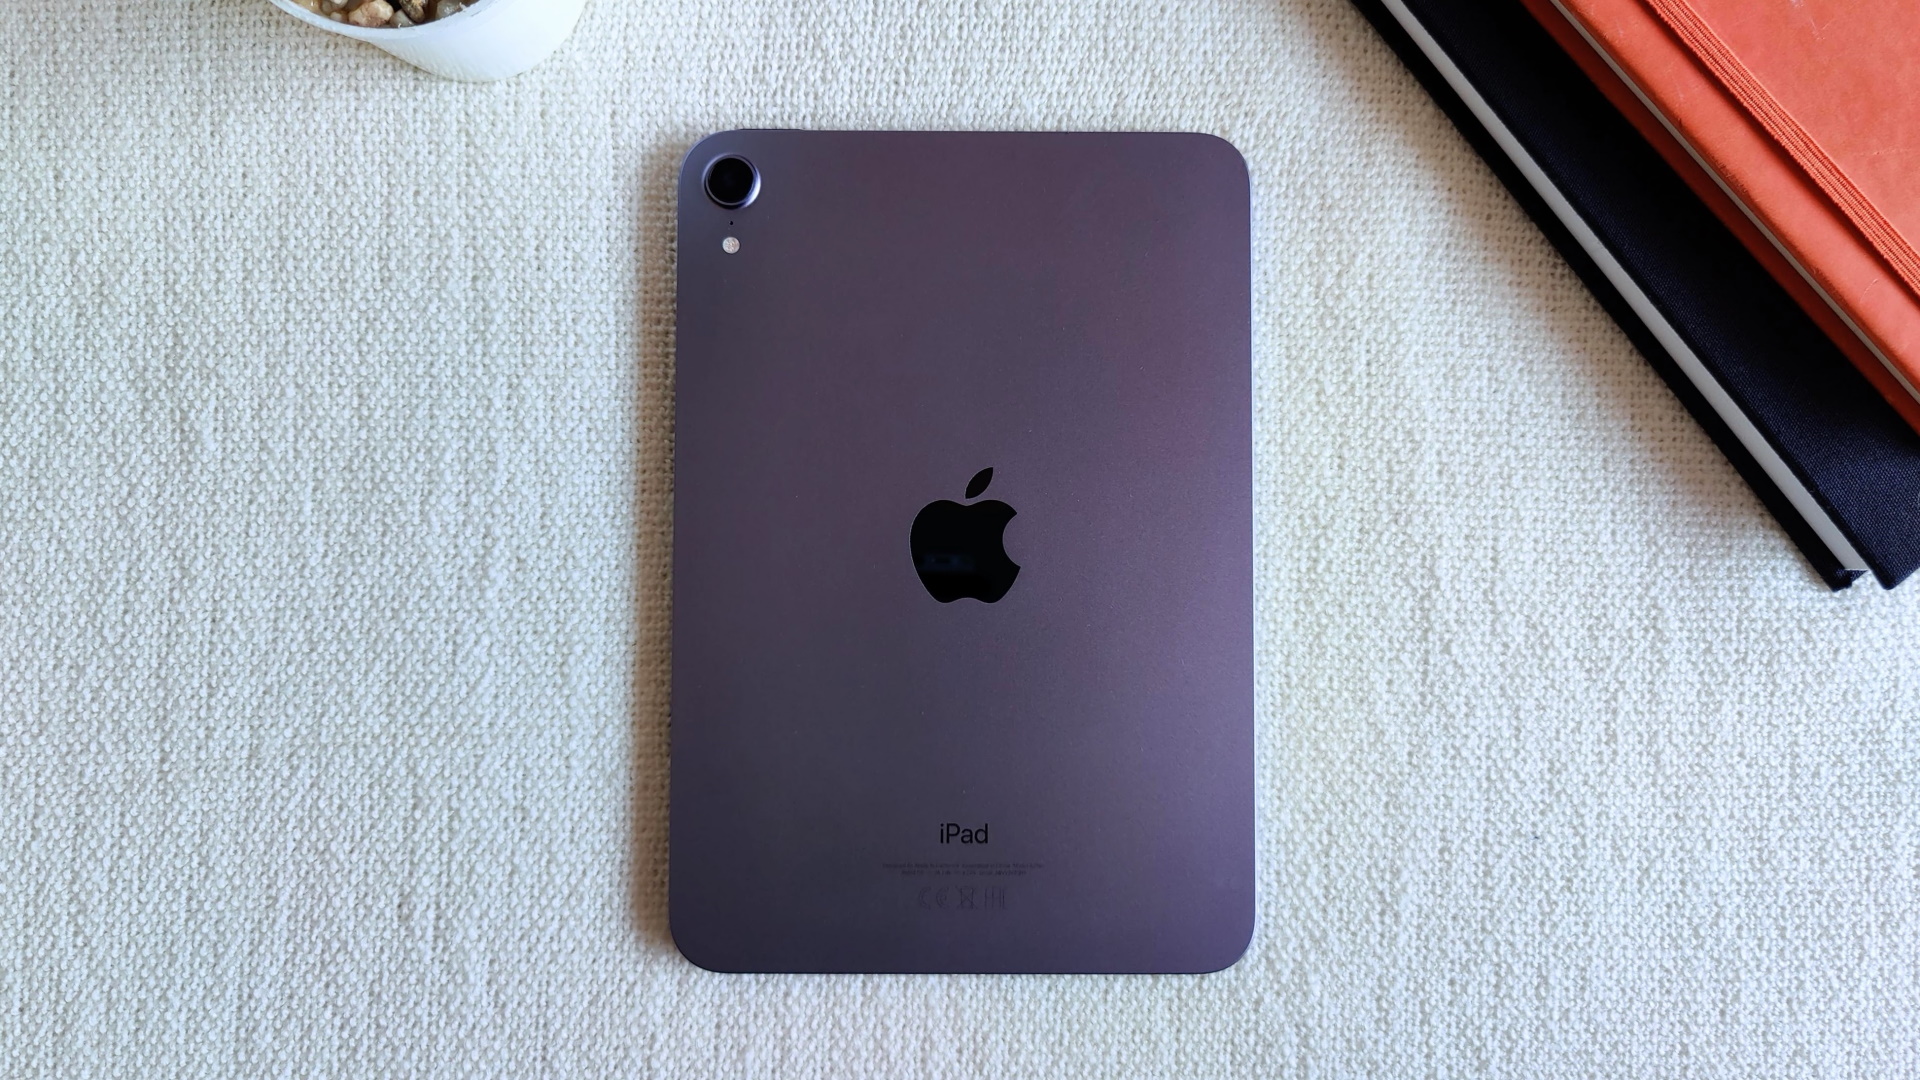 6th gen iPad Mini review purple flat showing rear view and camera